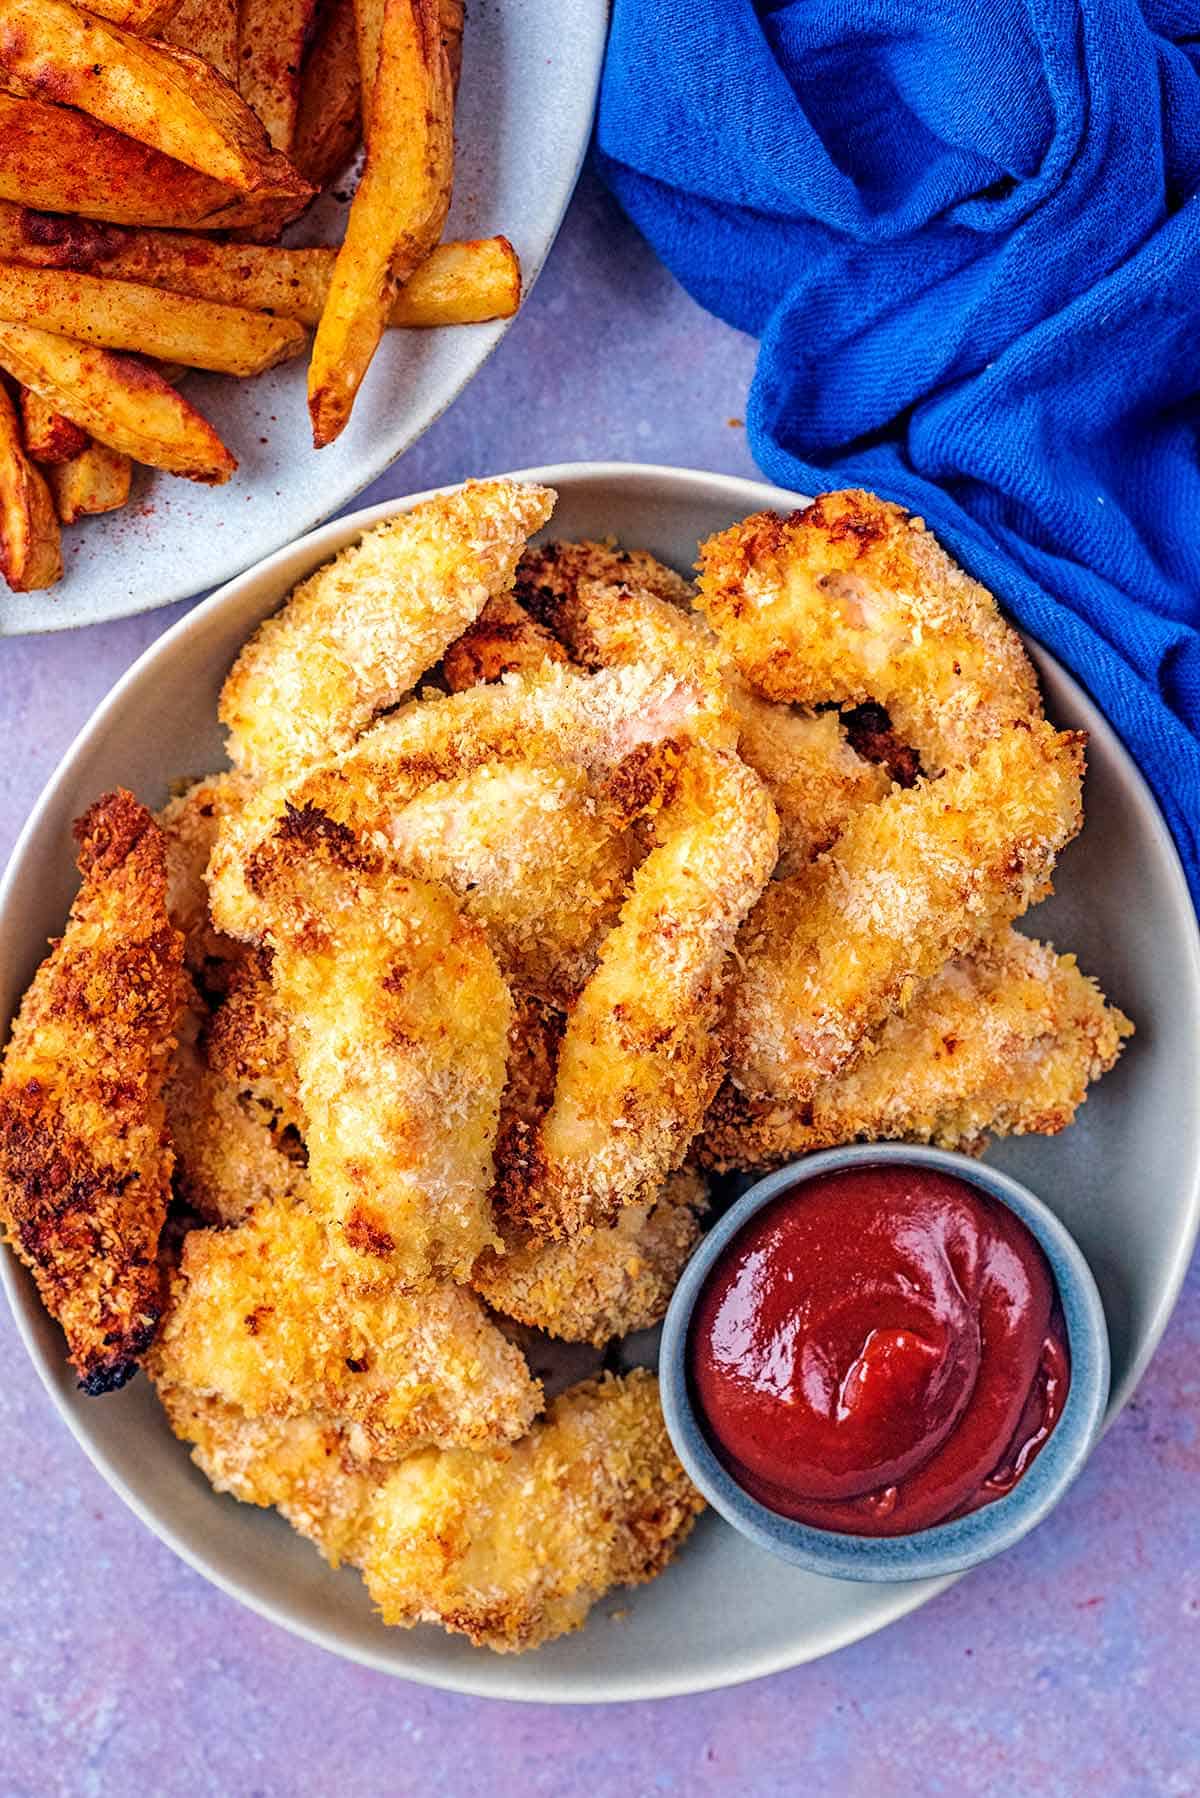 Plateful of crispy chicken goujons with a side of ketchup on the plate and a plate of french fries served next to it. 